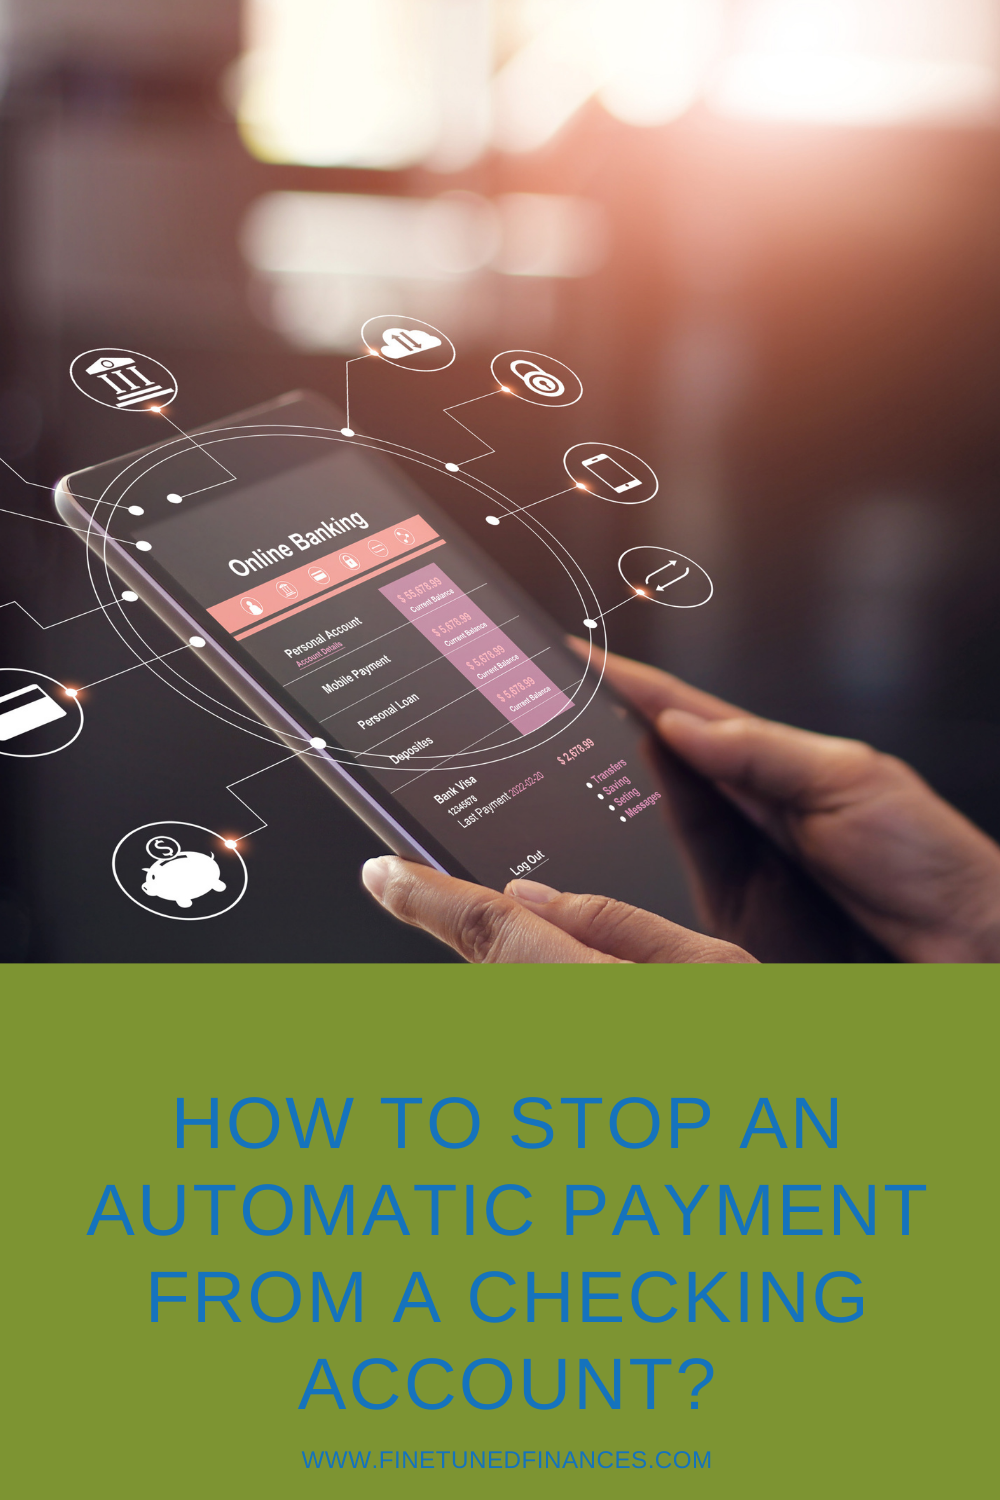 How to Stop an Automatic Payment From a Checking Account